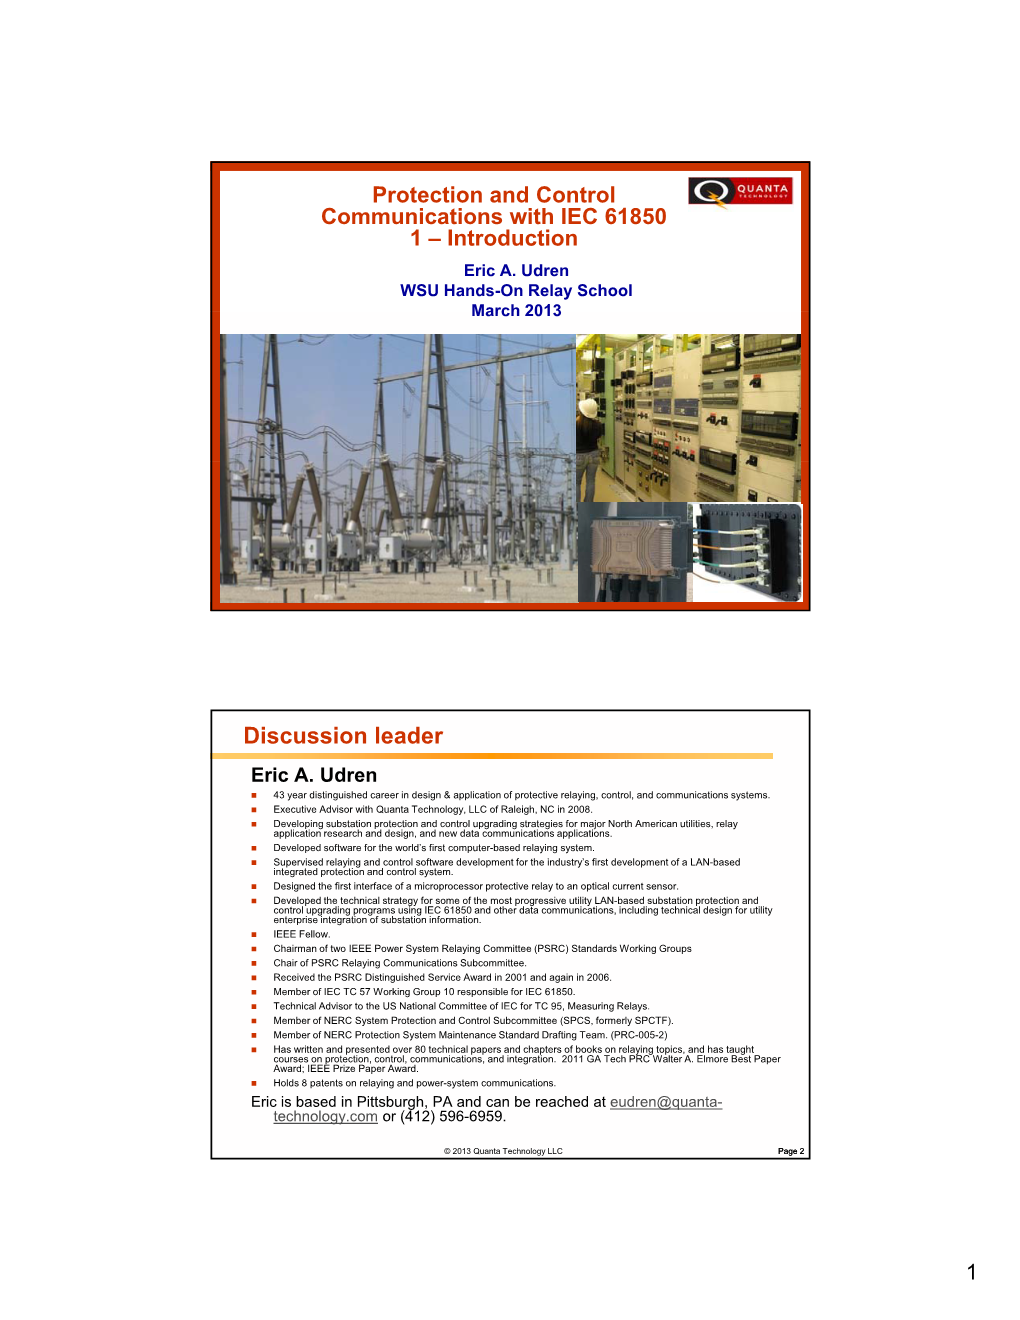 Protection and Control Communications with IEC 61850 1 – Introduction Eric A